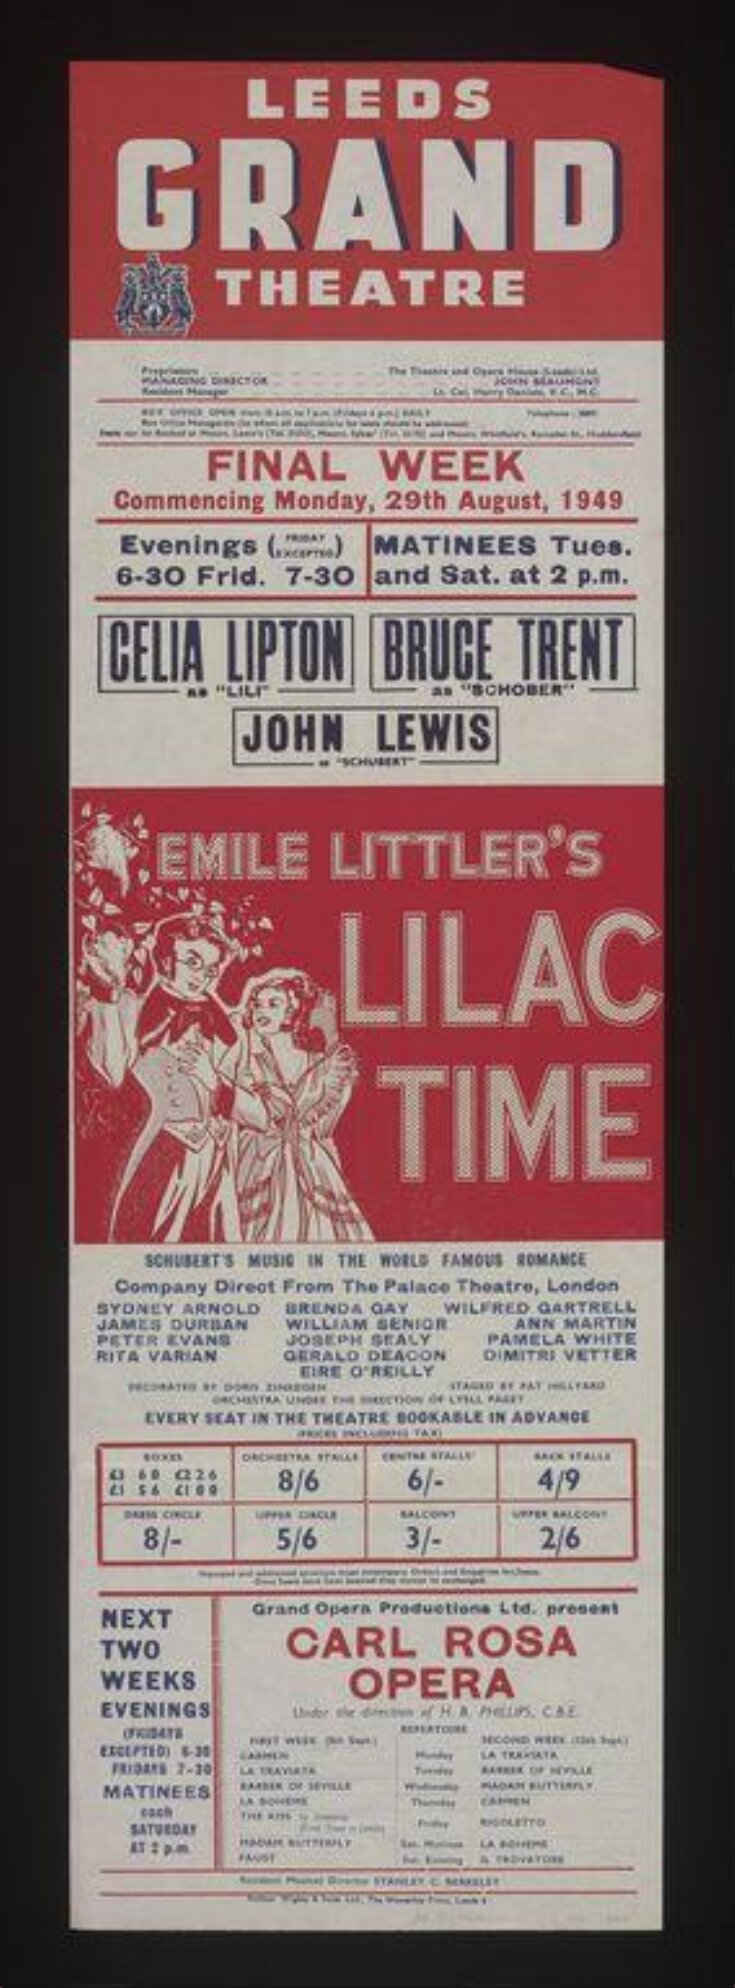 Lilac Time image